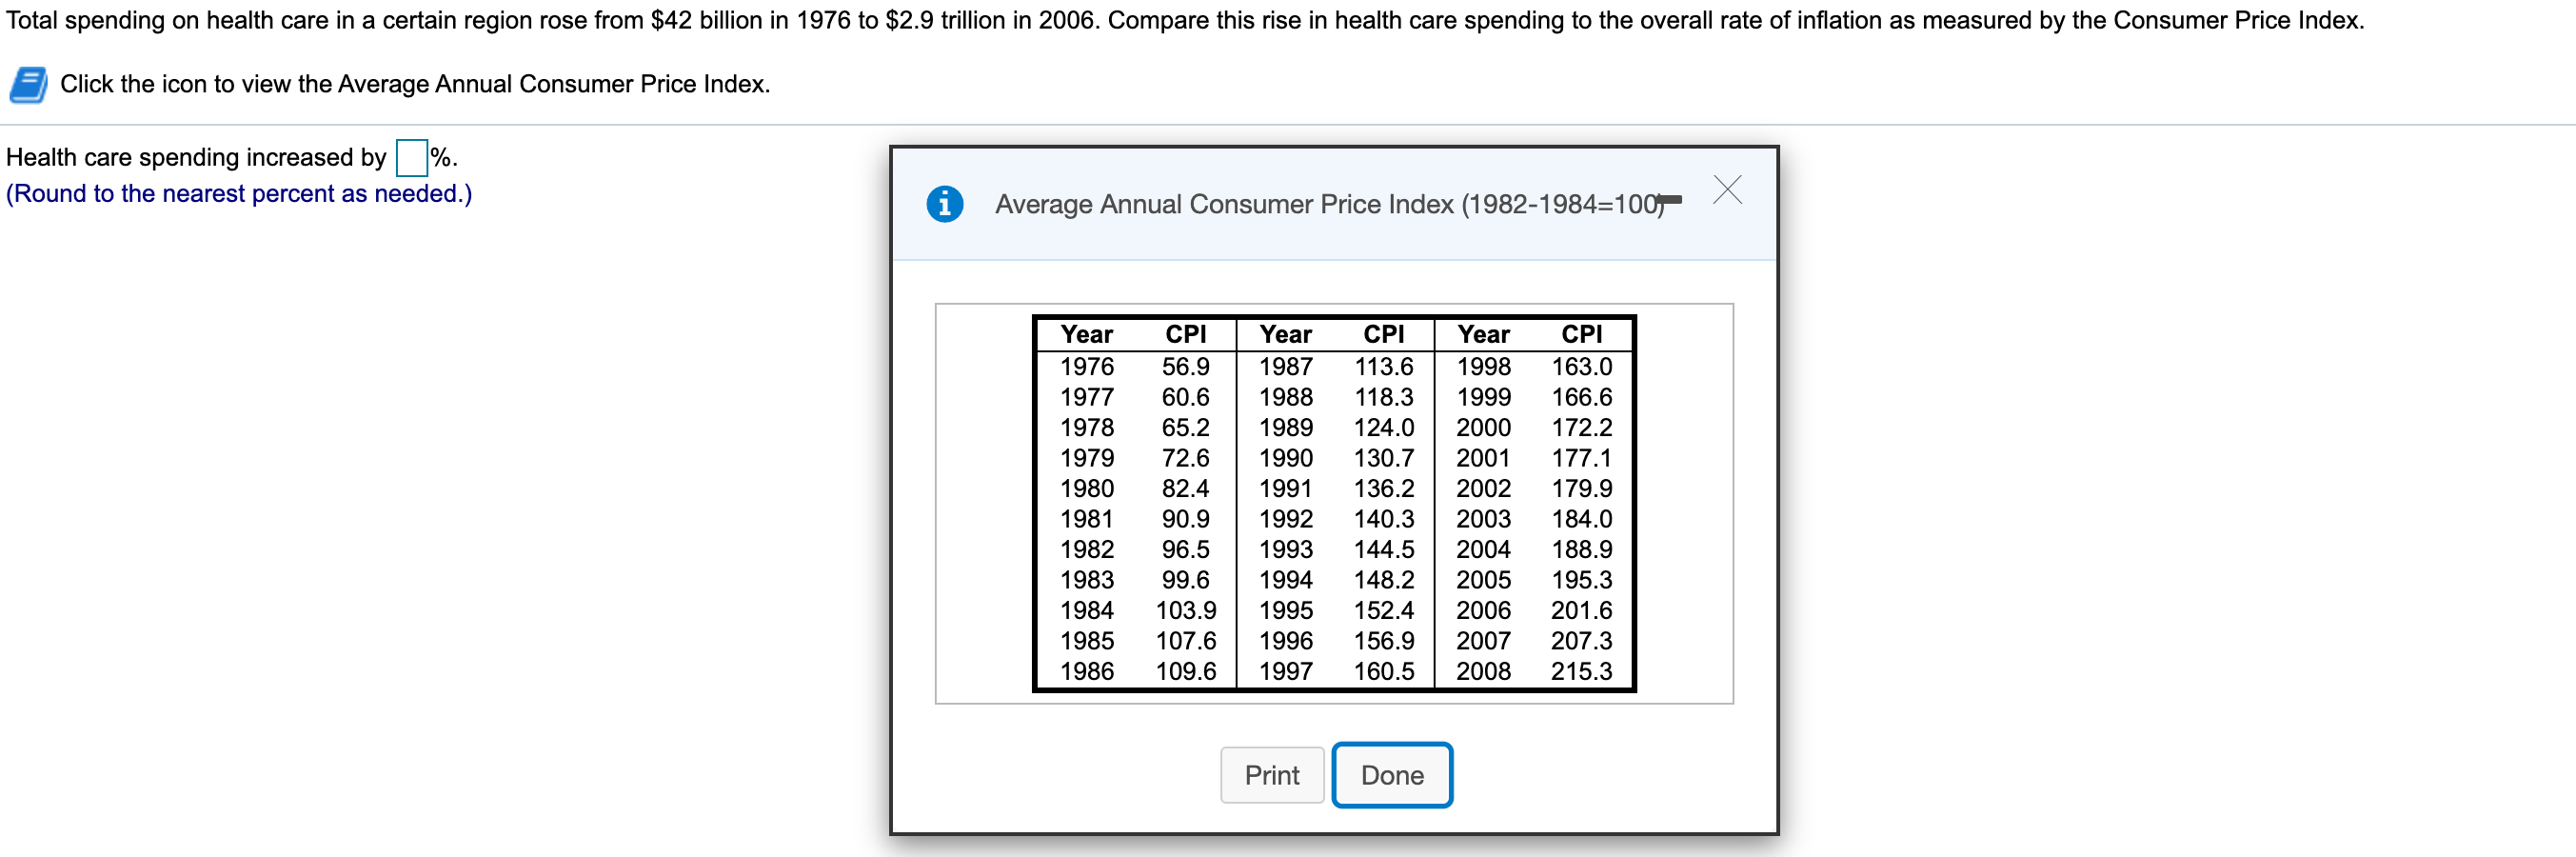 Total spending on health care in a certain region rose from $42 billion in 1976 to $2.9 trillion in 2006. Compare this rise in health care spending to the overall rate of inflation as measured by the Consumer Price Index.
Click the icon to view the Average Annual Consumer Price Index.
Health care spending increased by
%.
(Round to the nearest percent as needed.)
i Average Annual Consumer Price Index (1982-1984=100
Year
Year
Year
CPI
CPI
CPI
1976
56.9
1987
113.6
1998
163.0
60.6
166.6
1977
1988
118.3
1999
65.2
124.0
1978
1989
2000
172.2
1979
2001
72.6
1990
130.7
177.1
136.2
1980
2002
82.4
1991
179.9
1981
2003
90.9
1992
140.3
184.0
1982
188.9
96.5
1993
144.5
2004
2005
1983
99.6
1994
148.2
195.3
1984
103.9
2006
1995
152.4
201.6
107.6
2007
1985
1996
156.9
207.3
1997
160.5
2008
1986
109.6
215.3
Print
Done
